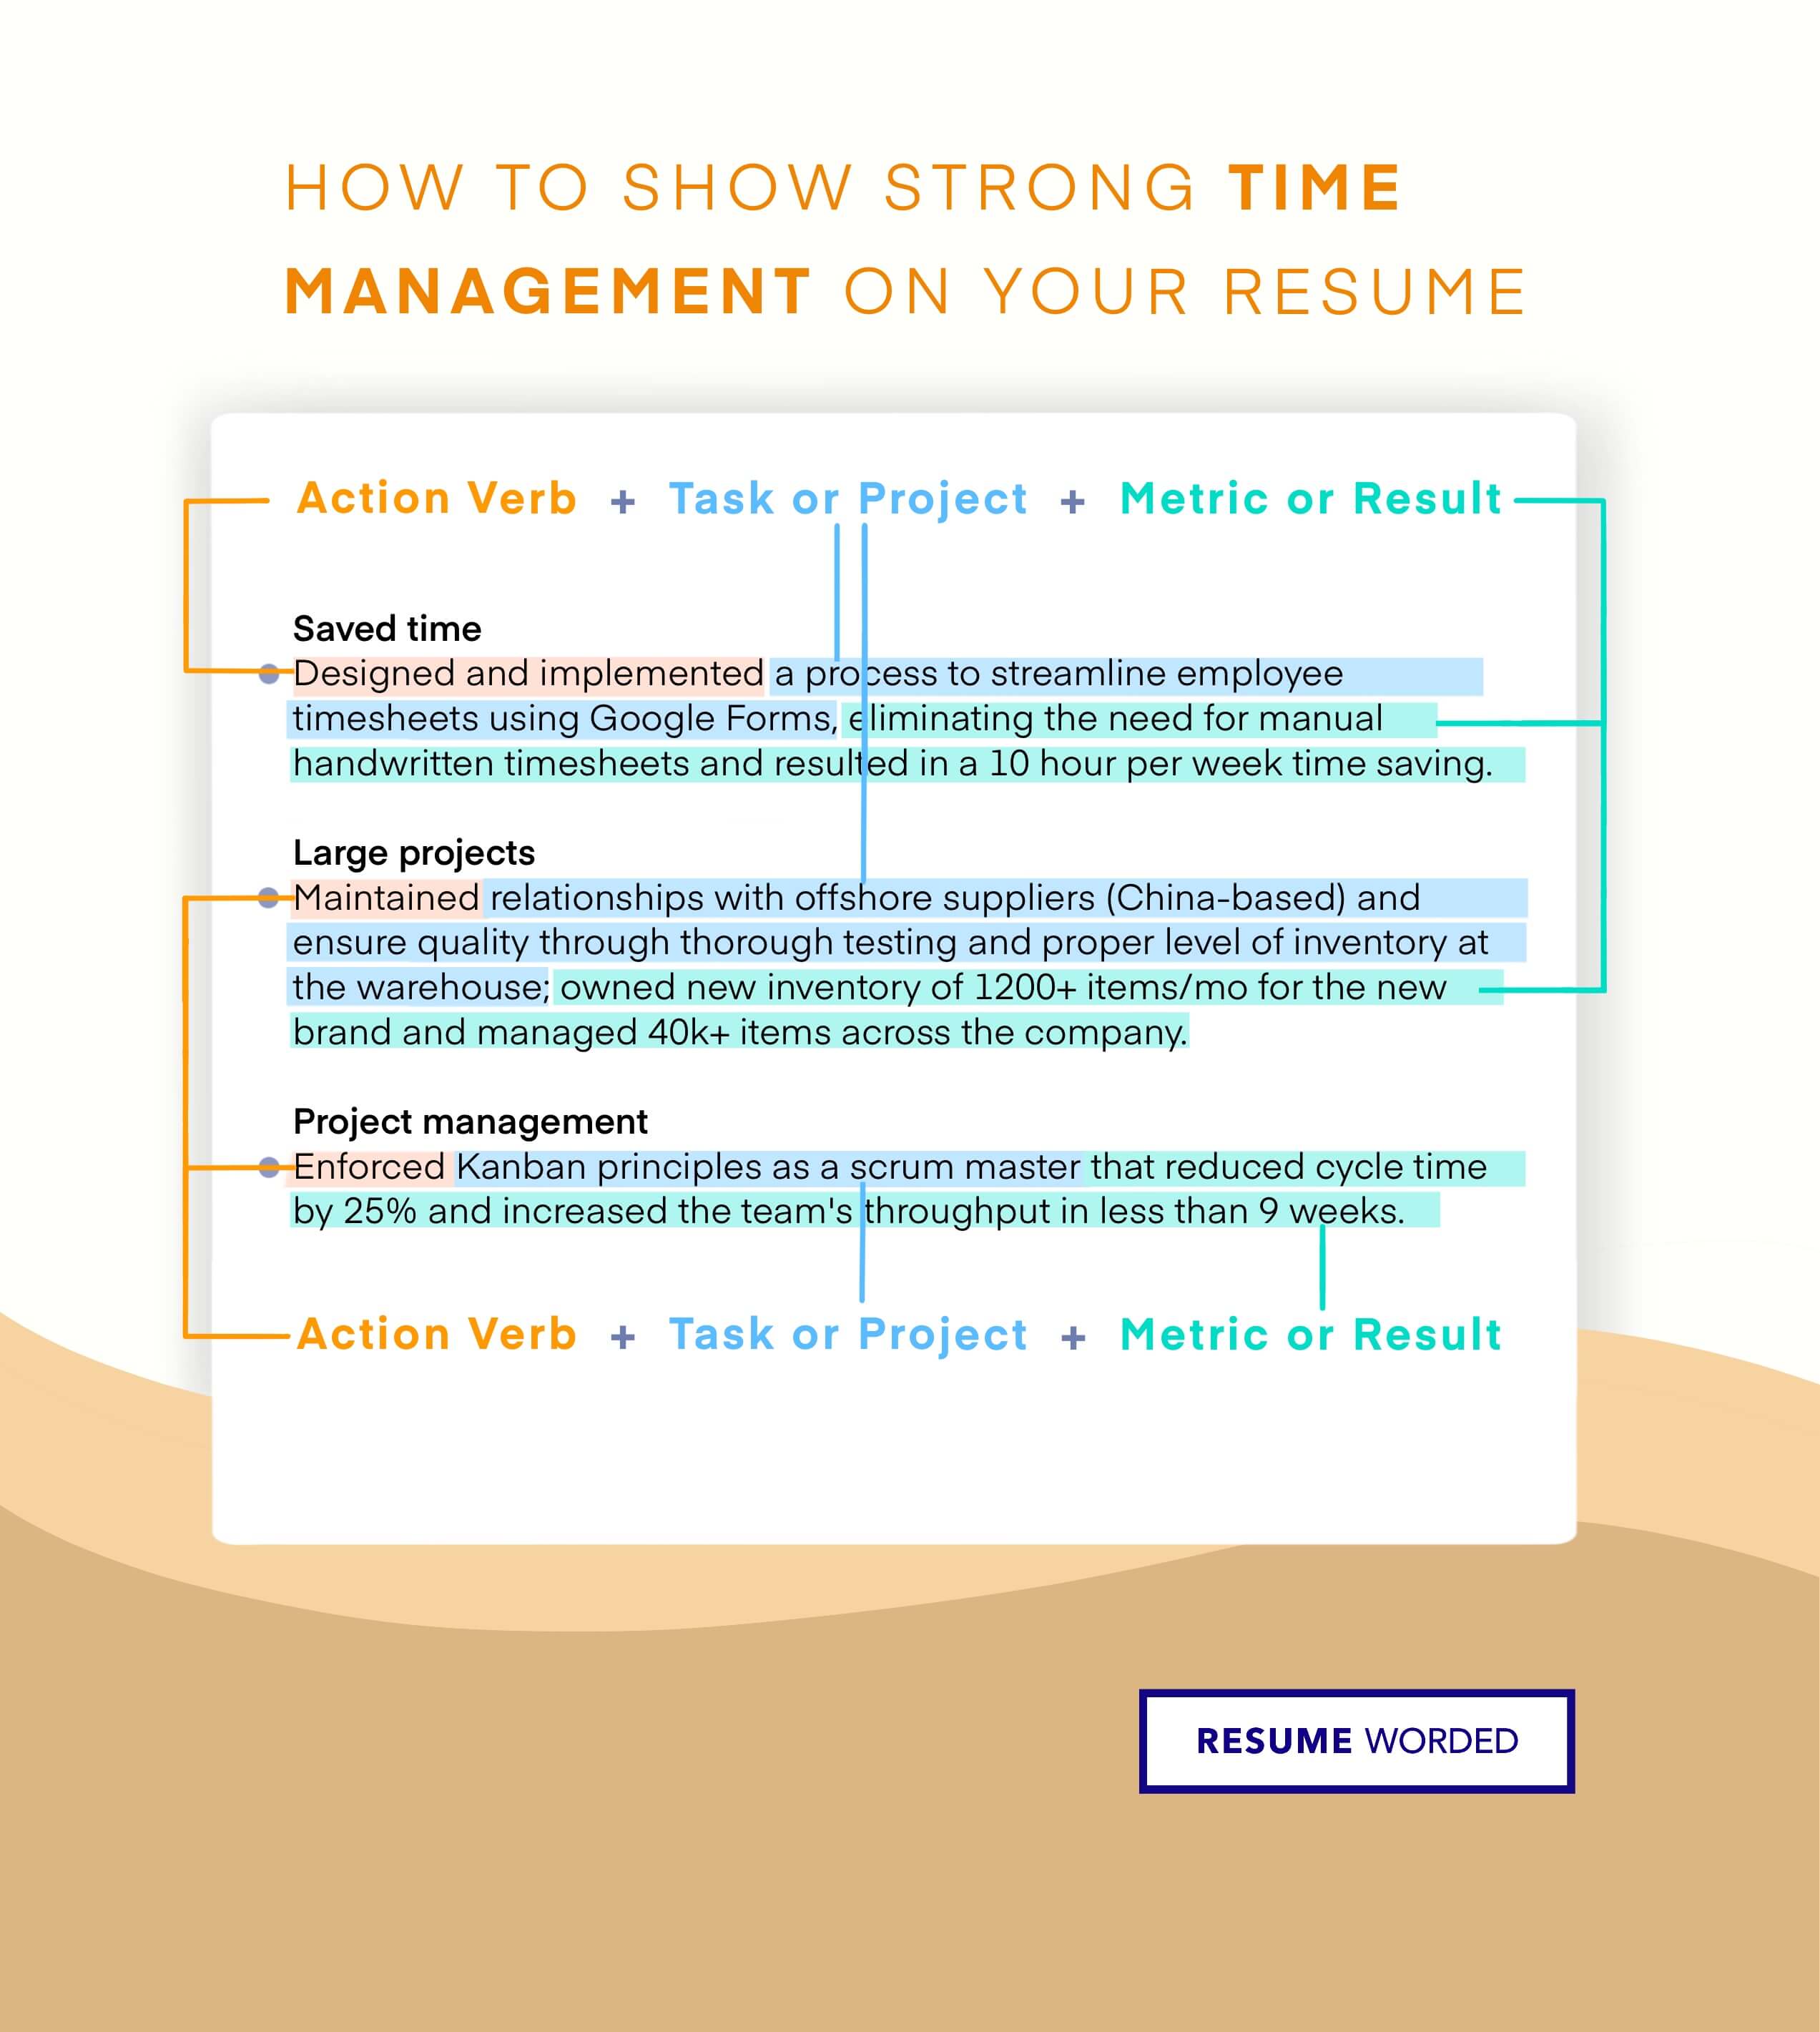 Showcase your time management skills - Executive Administrative Assistant Resume